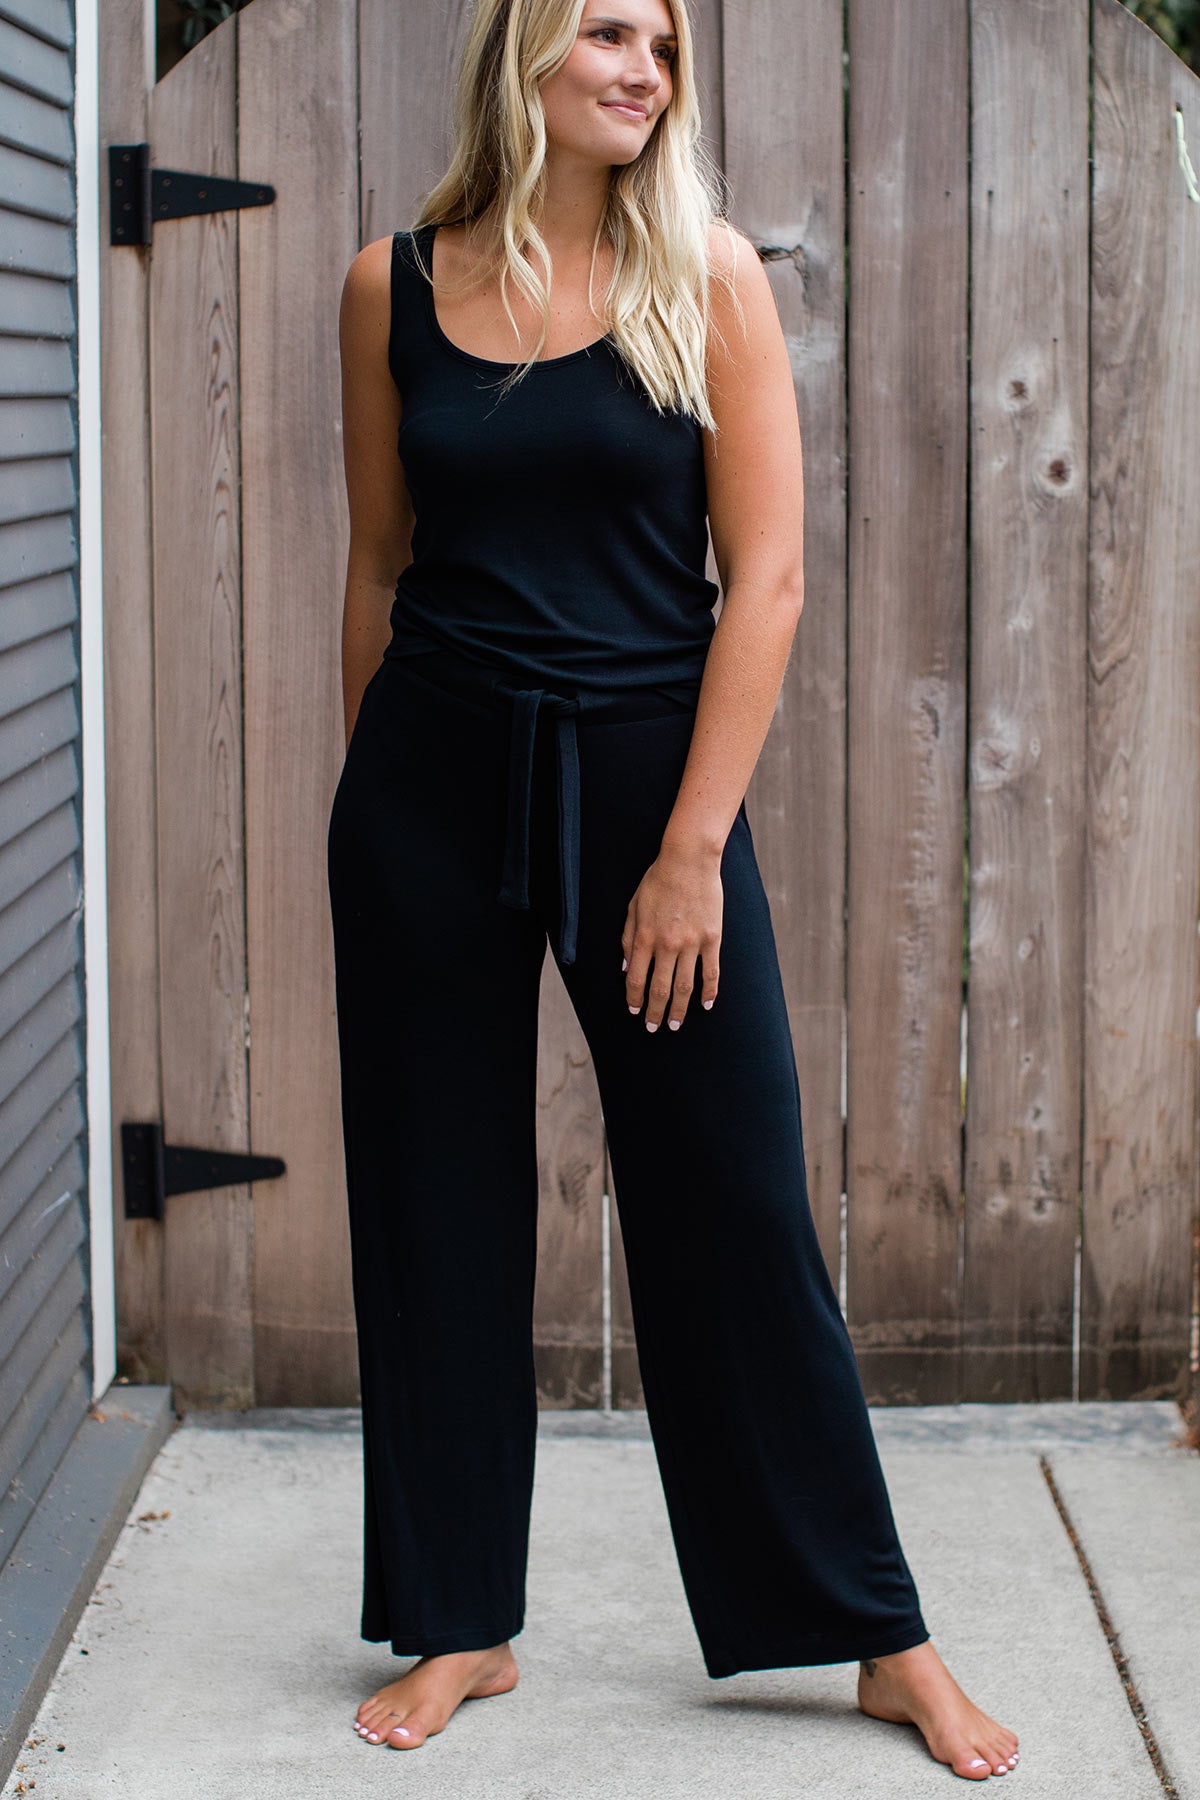 A woman standing and smiling with one leg stretched out to the side, wearing Yala Peyton Bamboo Sweater Drawstring Lounge Pants in Black